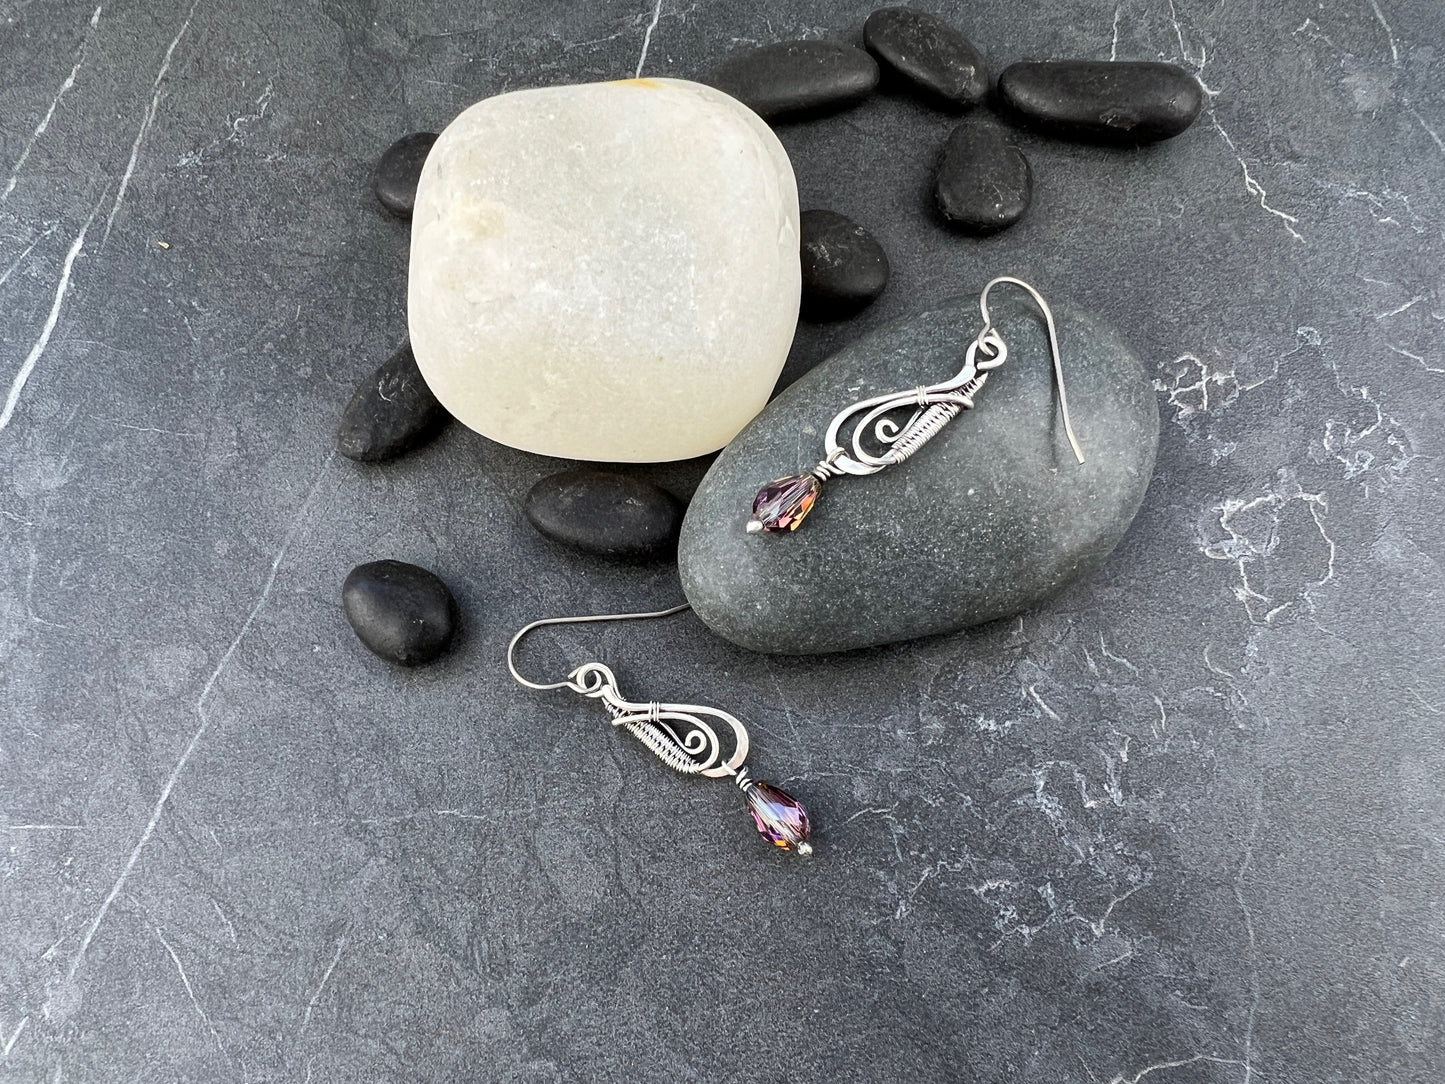 Handcrafted Sterling Silver Tear Drop Earrings with Watermelon Crystal | Intricate Wire Woven Design